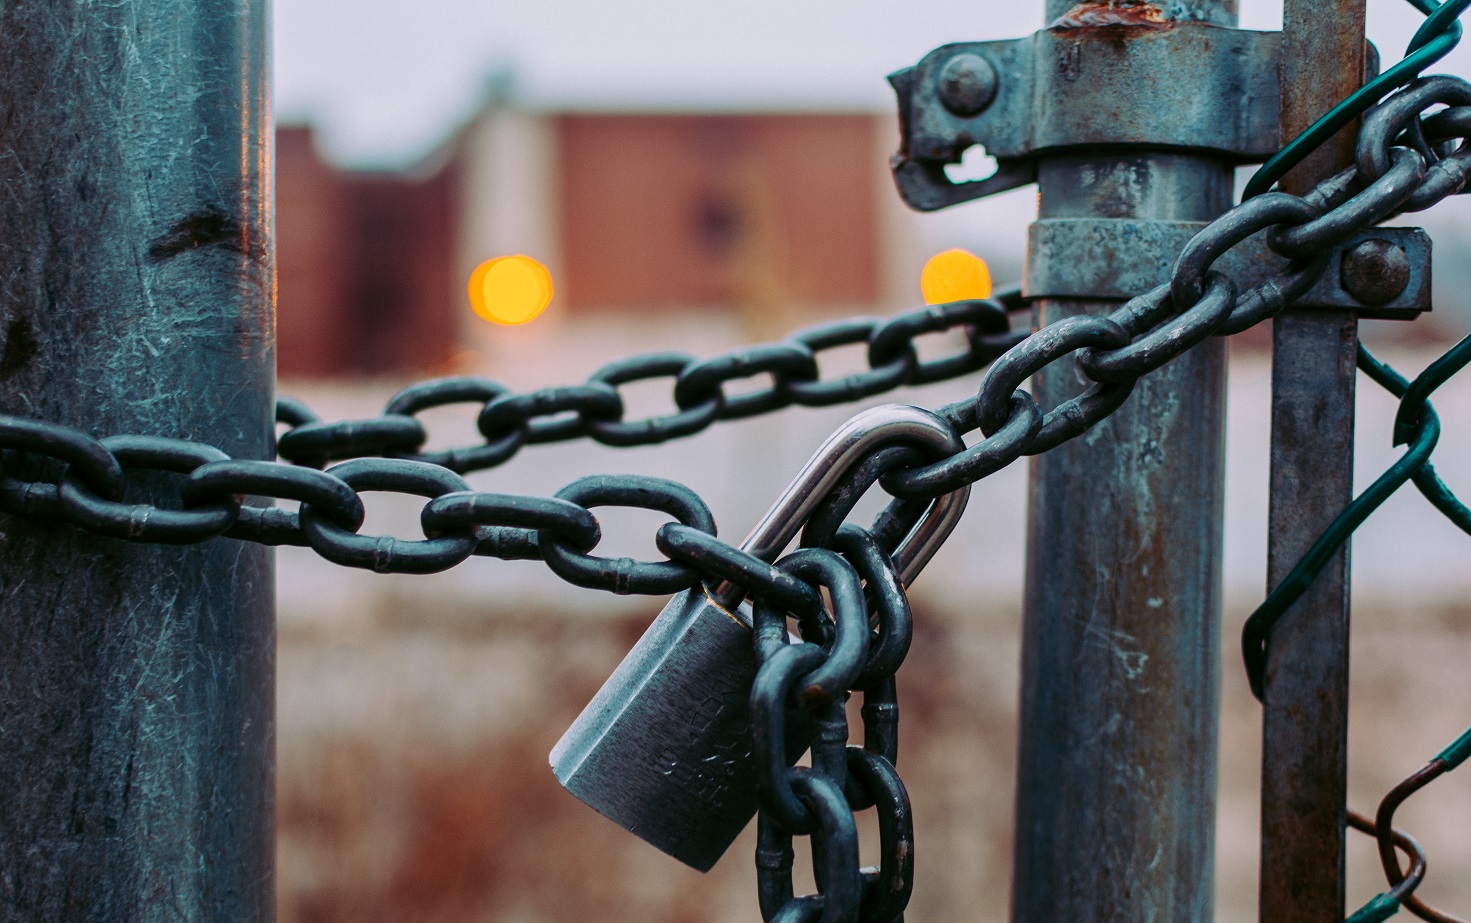 An image showing a padlock being used to secure a gate